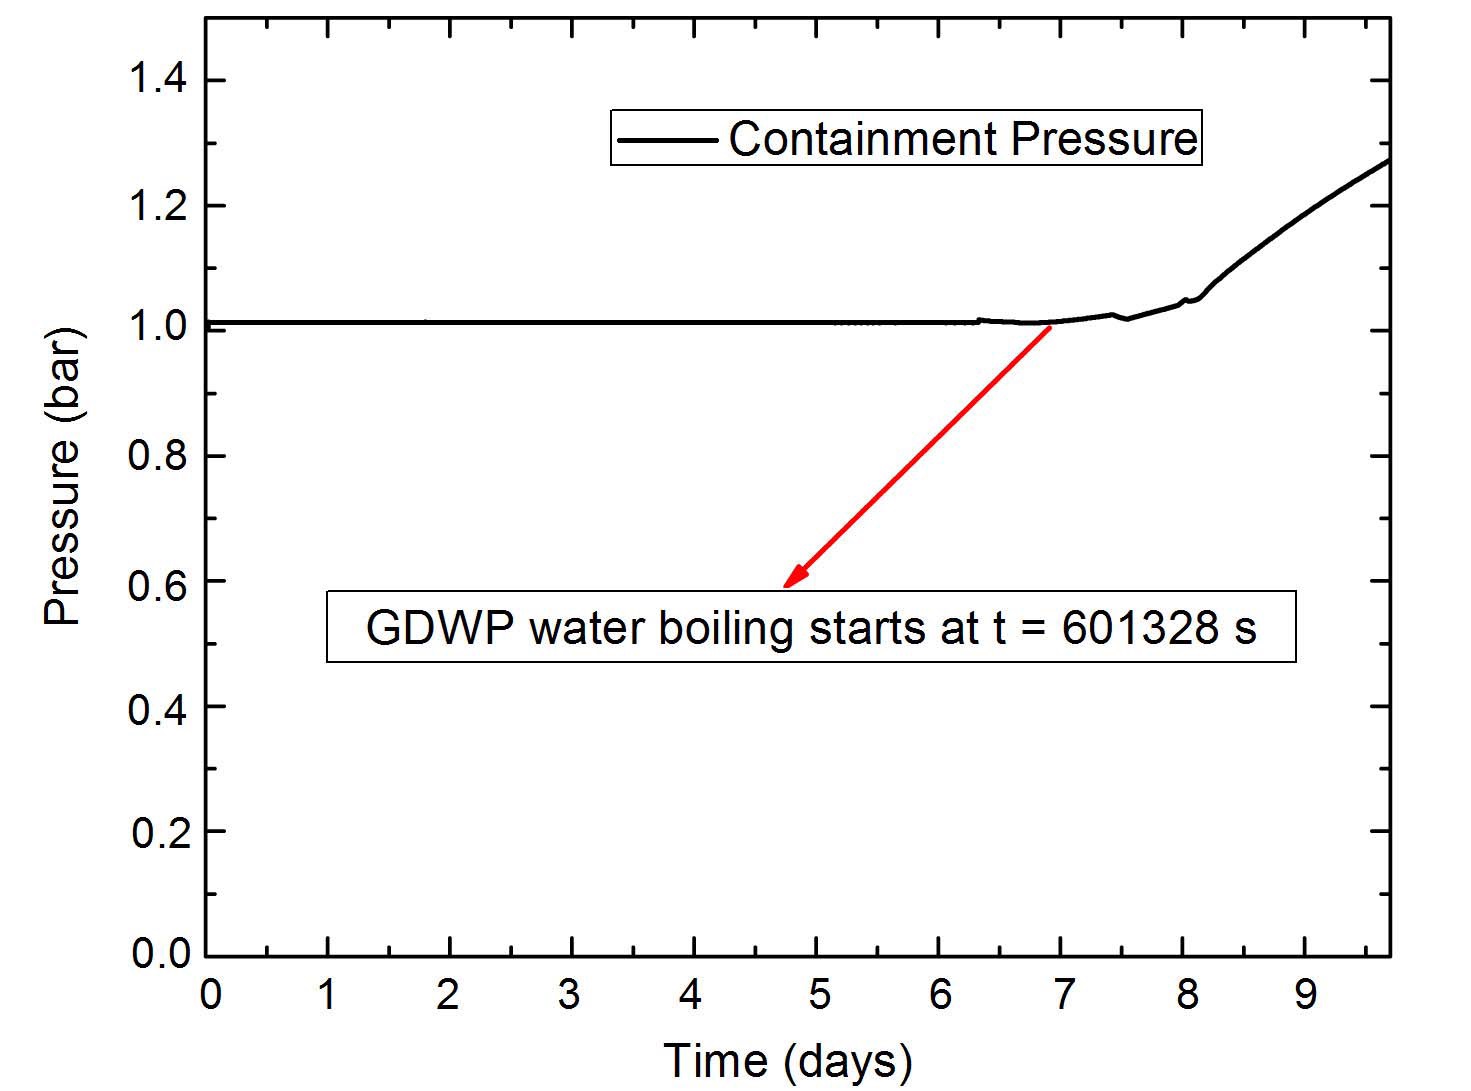 Containment Pressure during Fukushima-like Accident